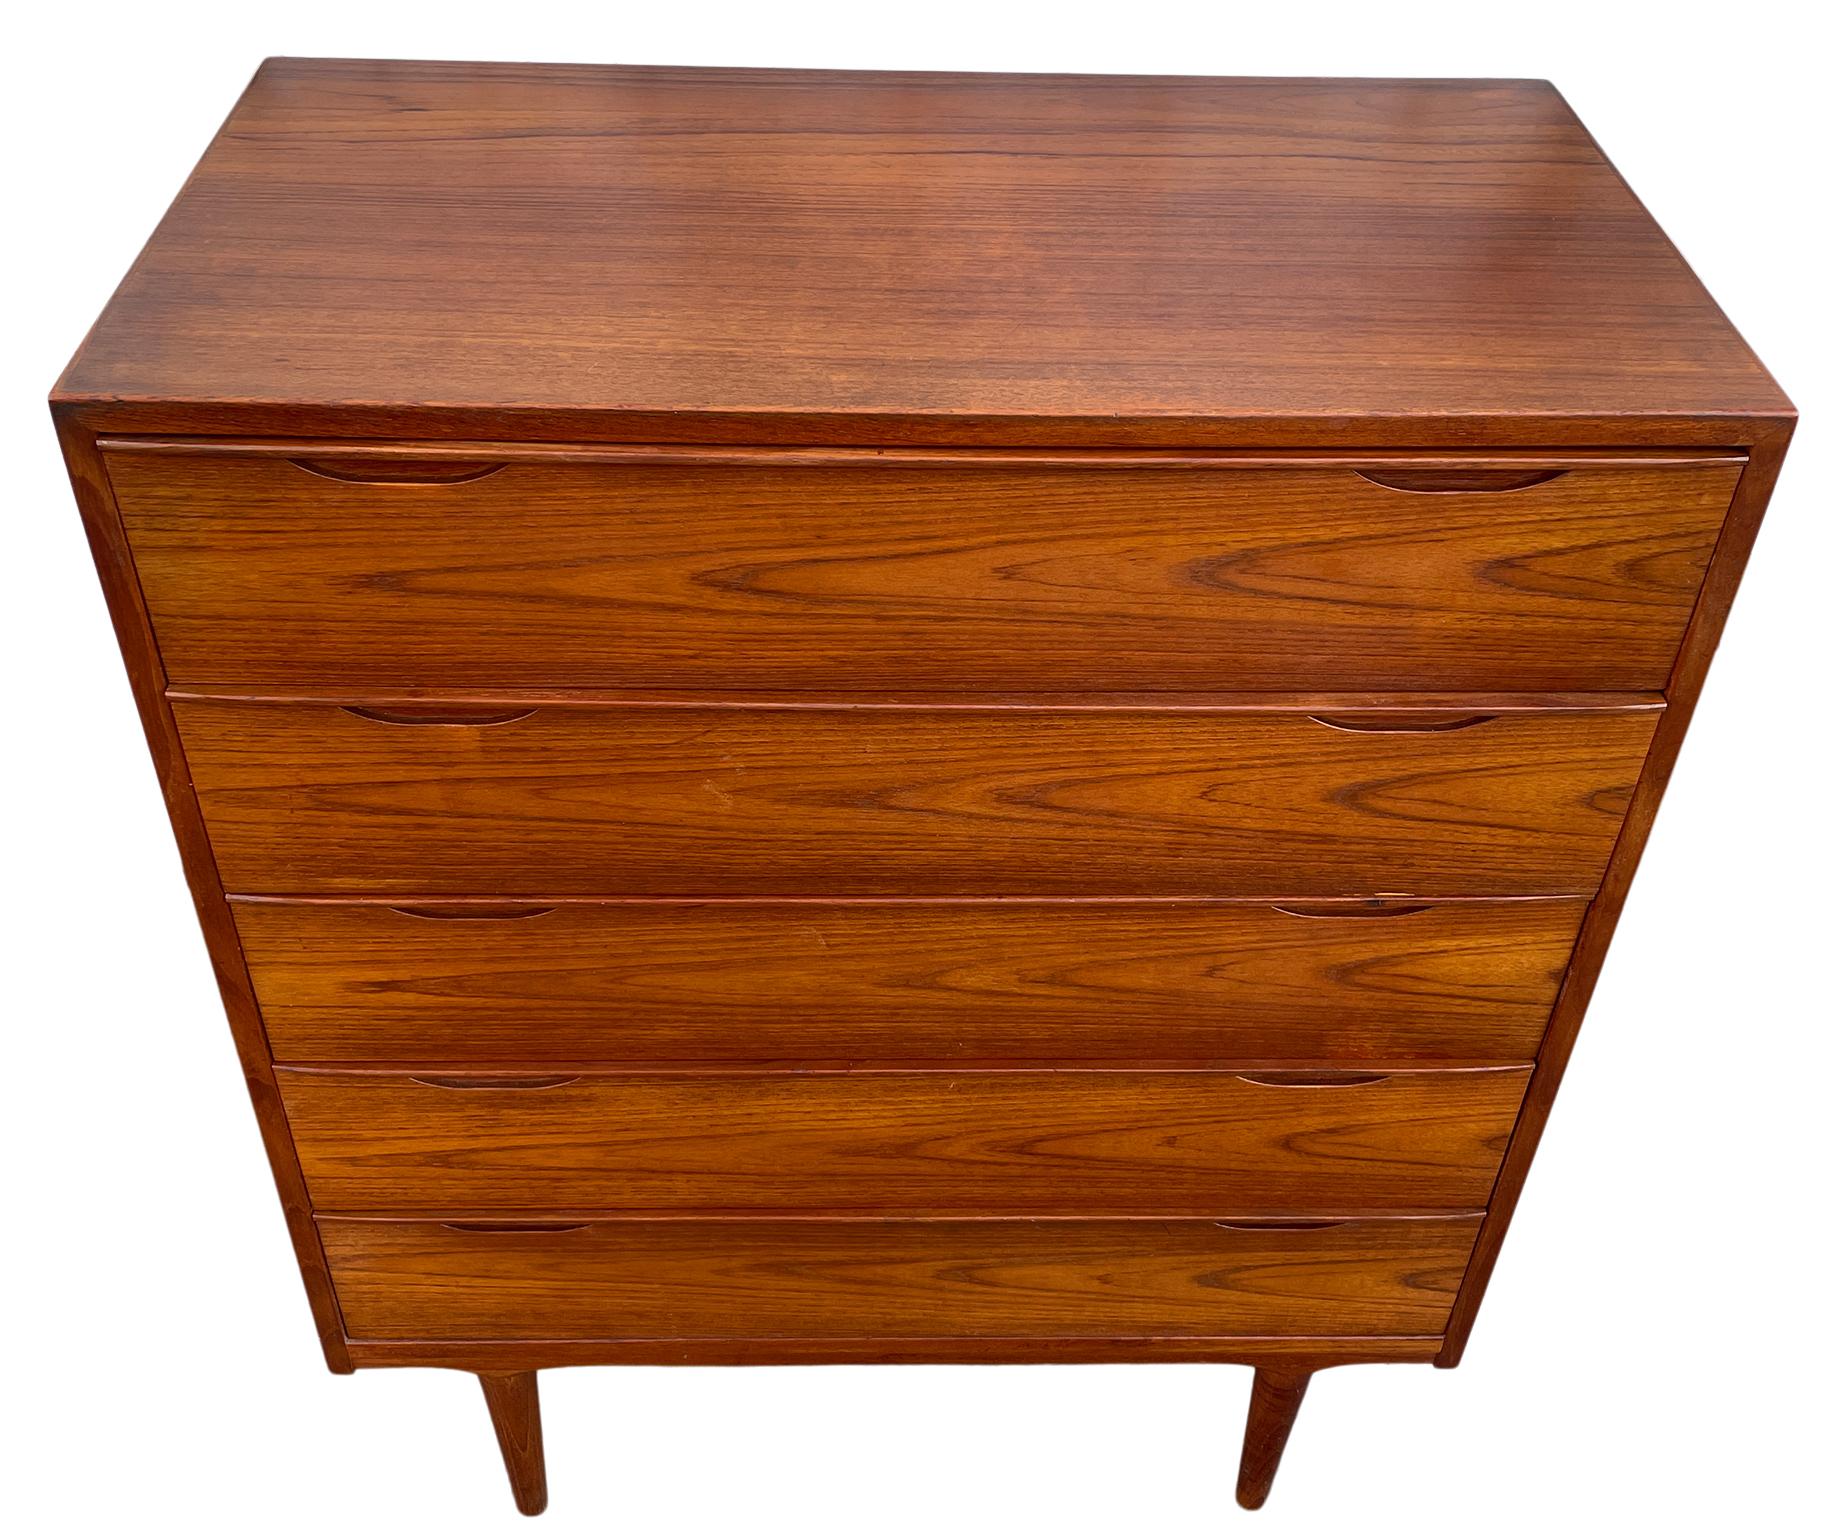 Mid Century Danish modern teak tall dresser by Arne Vodder denmark. Beautiful carved handles tall 5 drawer danish dresser. Amazing construction and quality woodwork. Stunning teak wood grain. Labeled on back. Located in Brooklyn NYC.